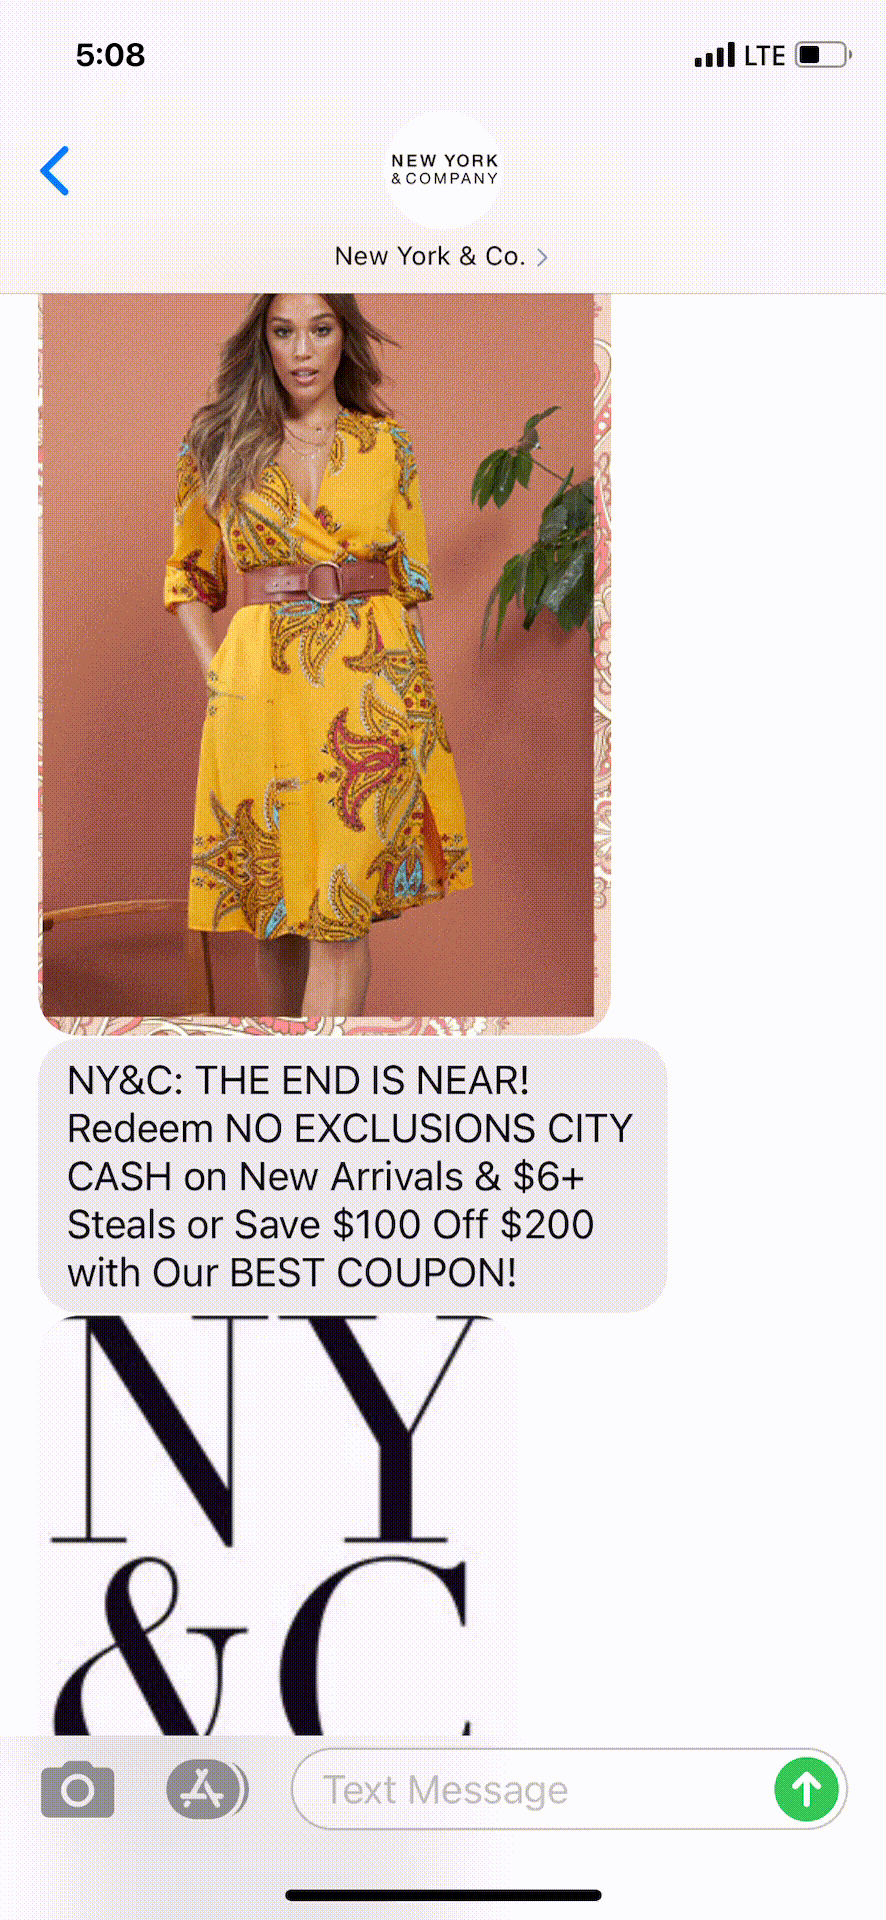 New-York-_-Co-Text-Message-Marketing-Example-04.19.2021